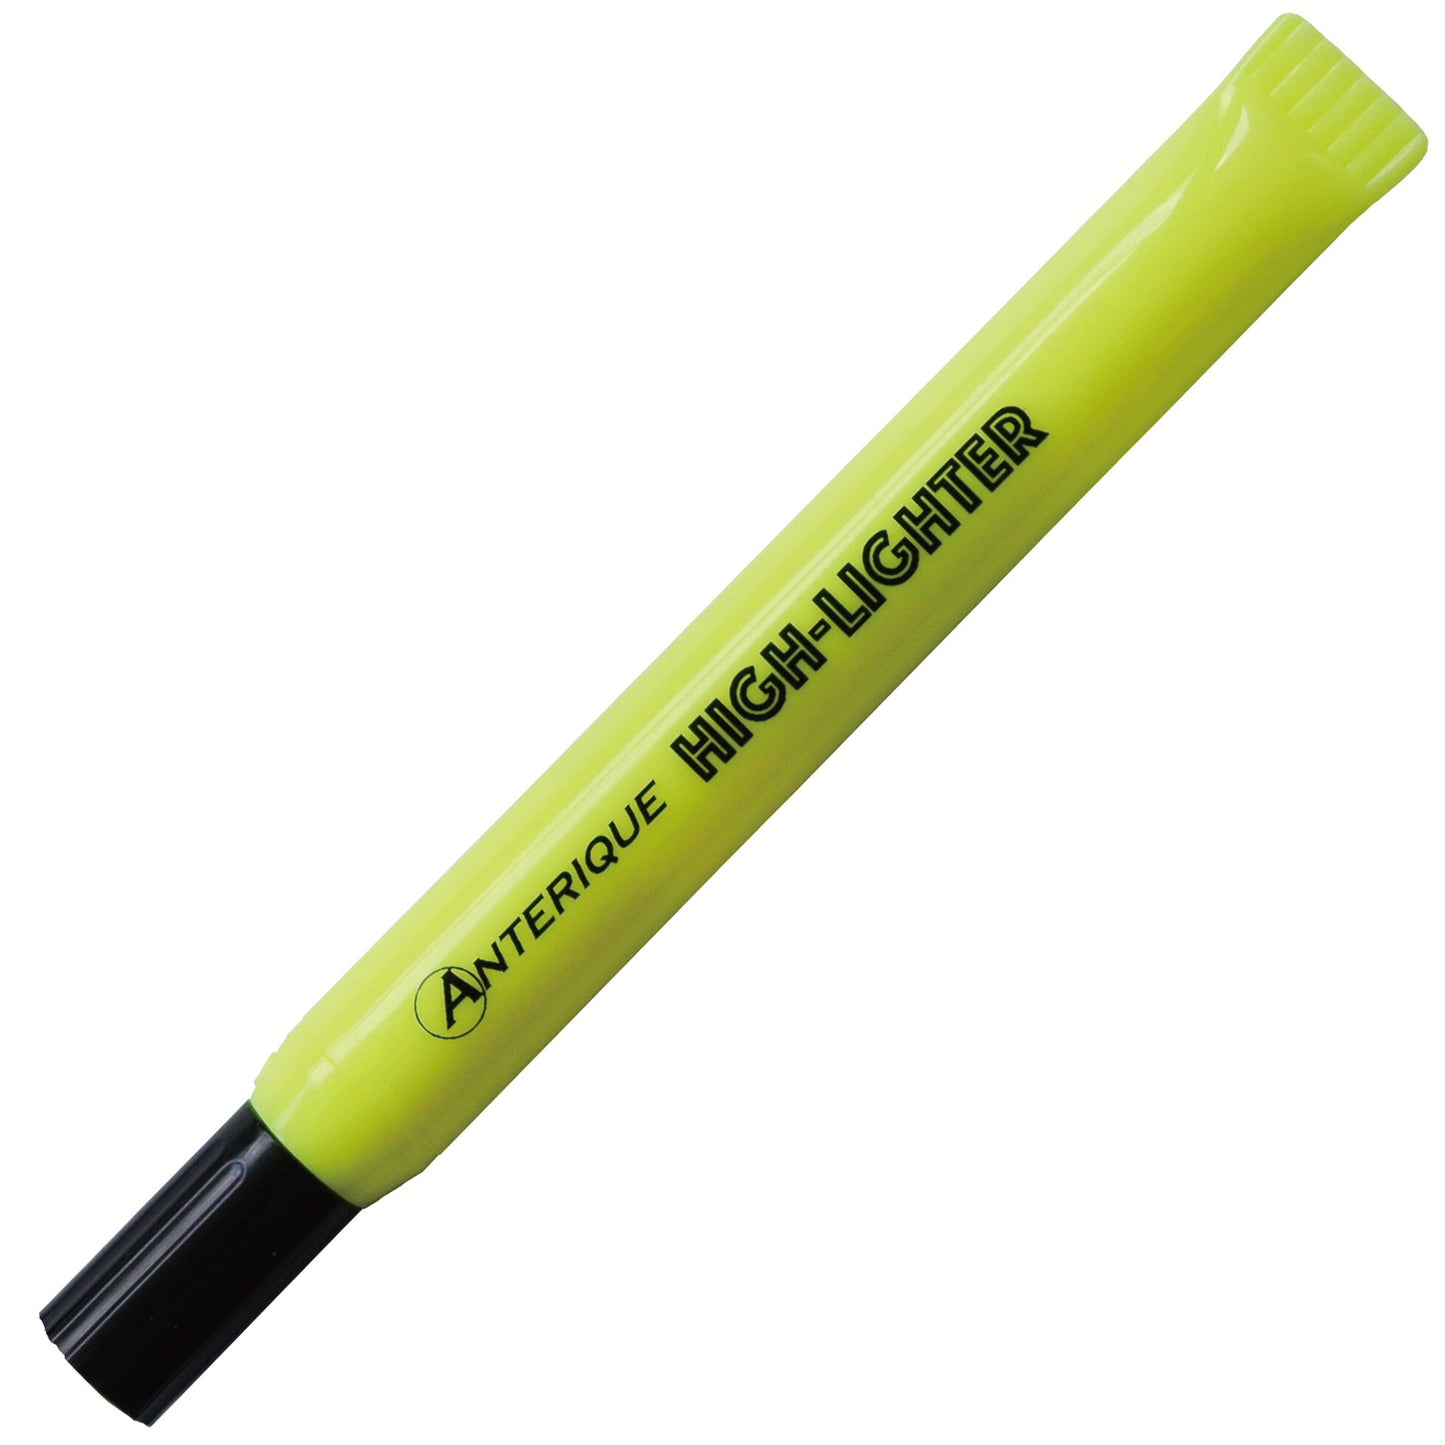 Anterique MK1 Fluorescent Highlighter Yellow Made in Japan